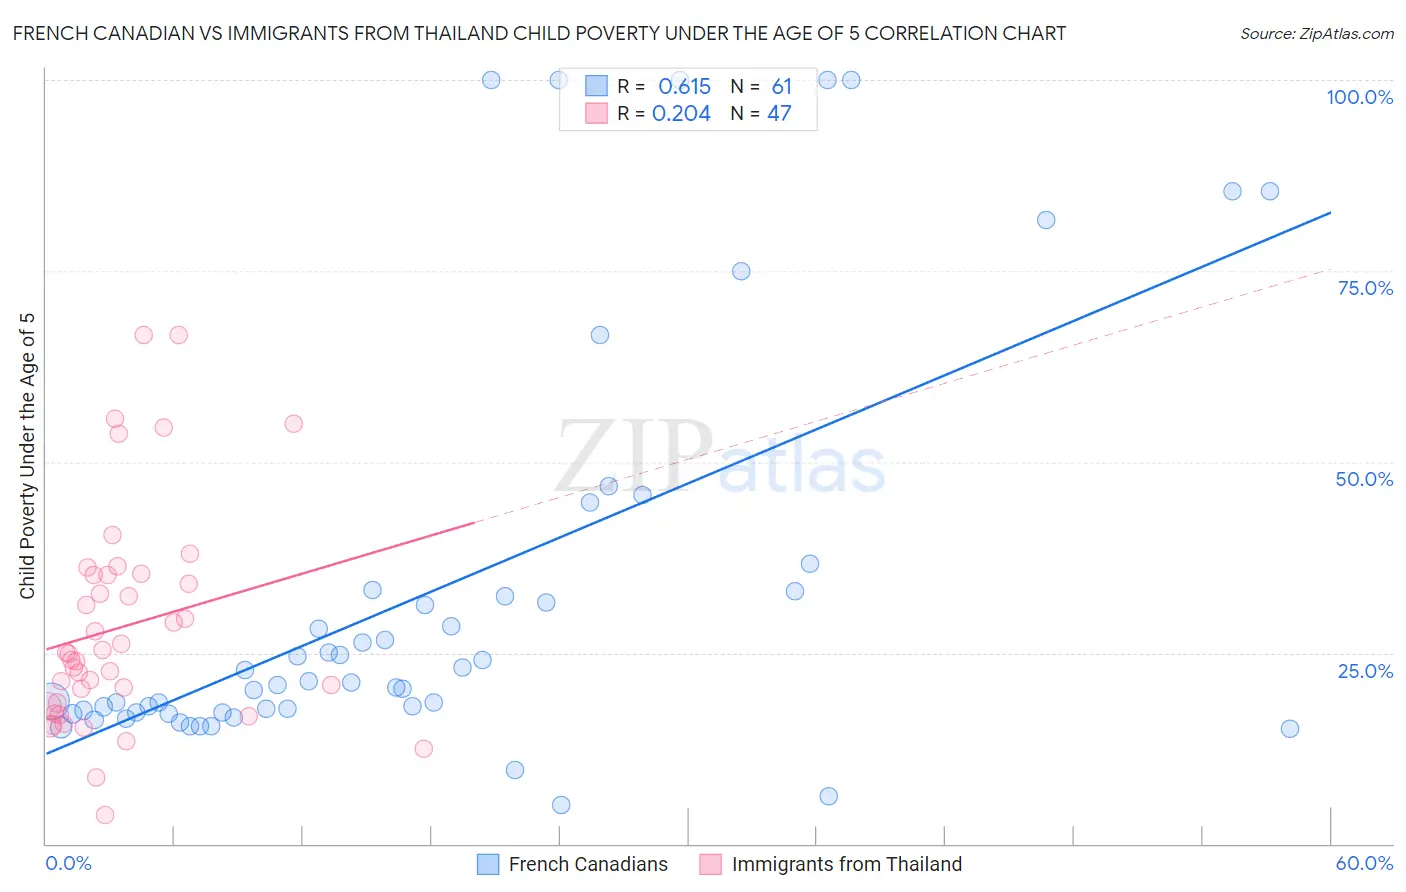 French Canadian vs Immigrants from Thailand Child Poverty Under the Age of 5